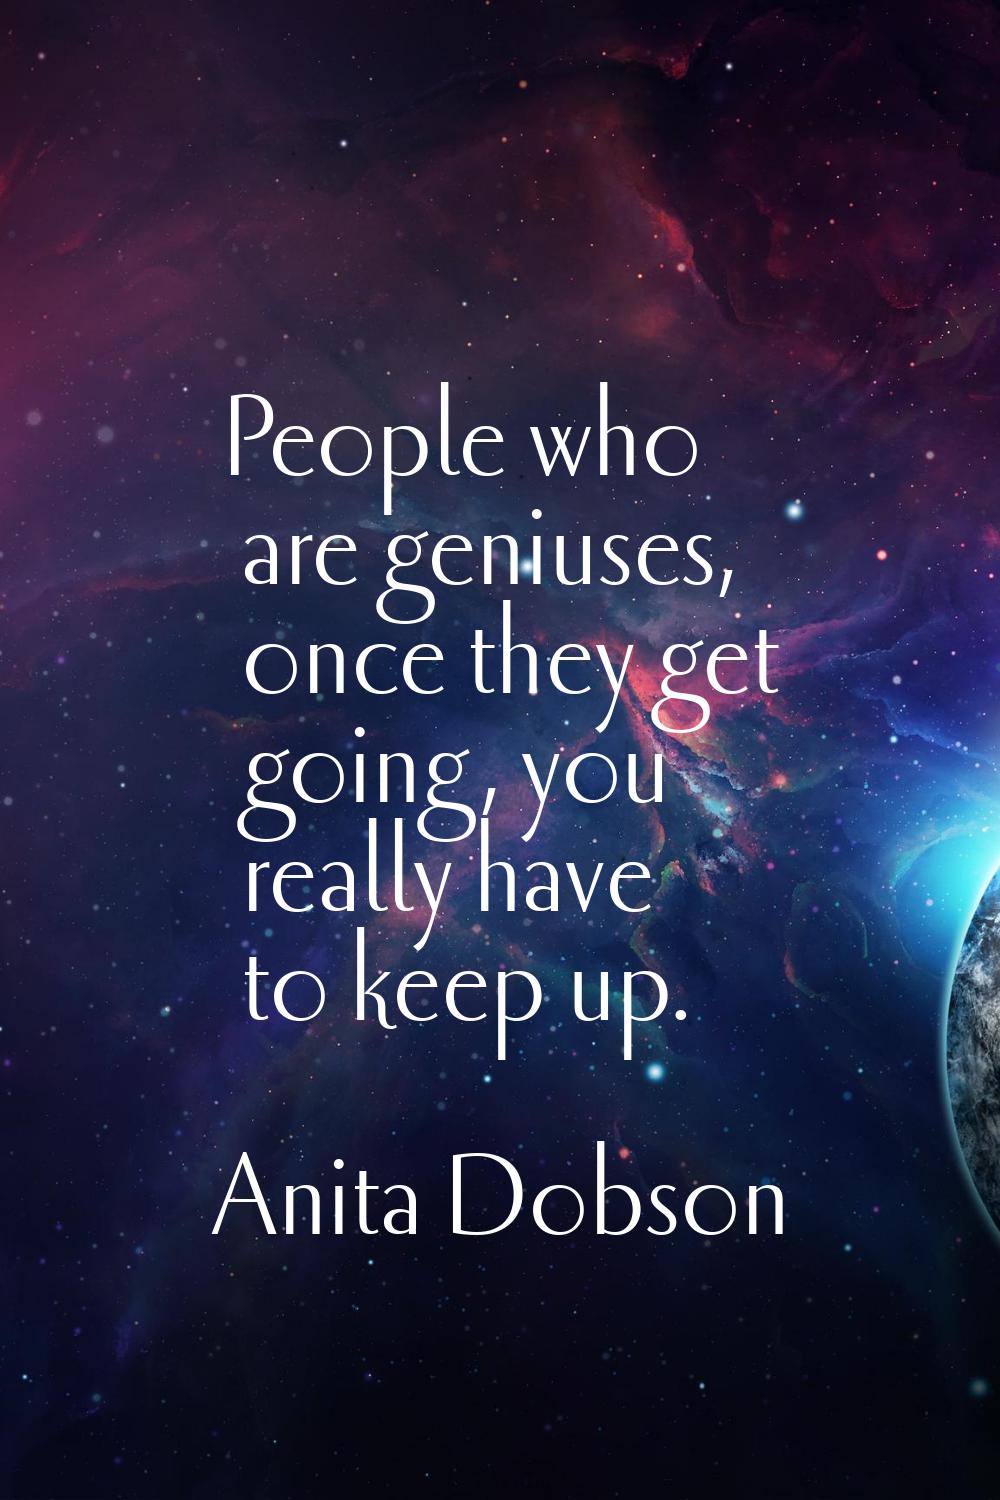 People who are geniuses, once they get going, you really have to keep up.